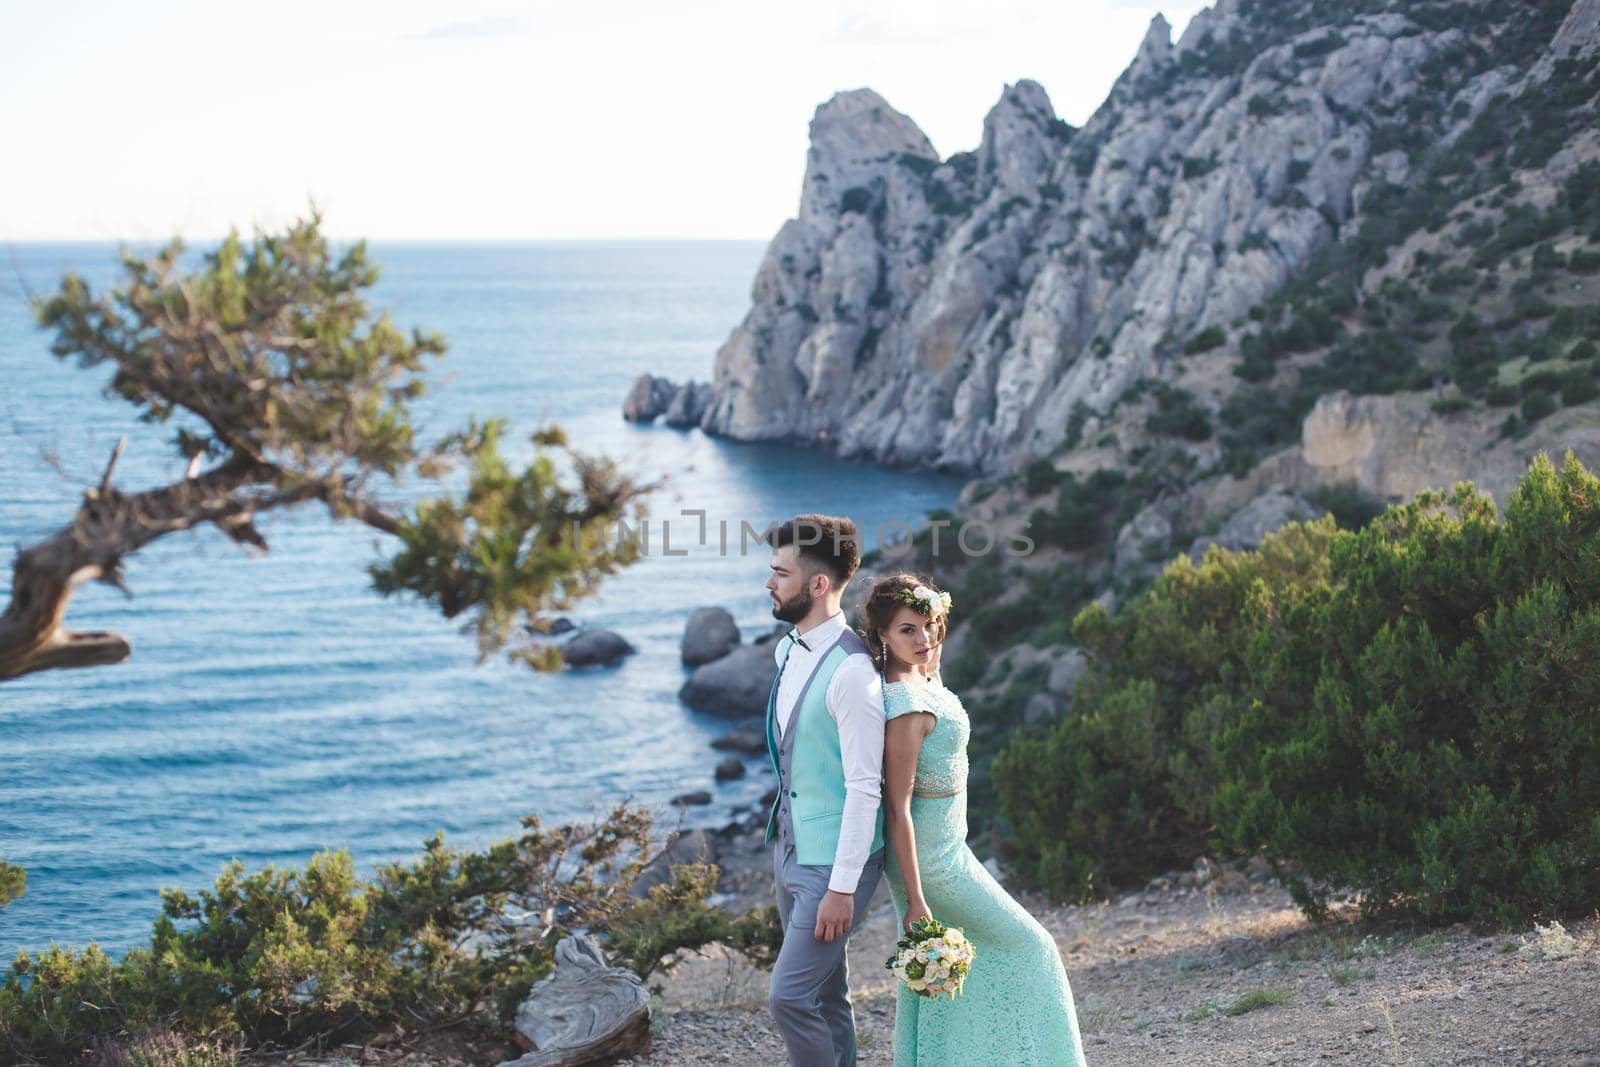 The bride and groom on nature in the mountains near the water. Suit and dress color Tiffany. Back to back by StudioPeace